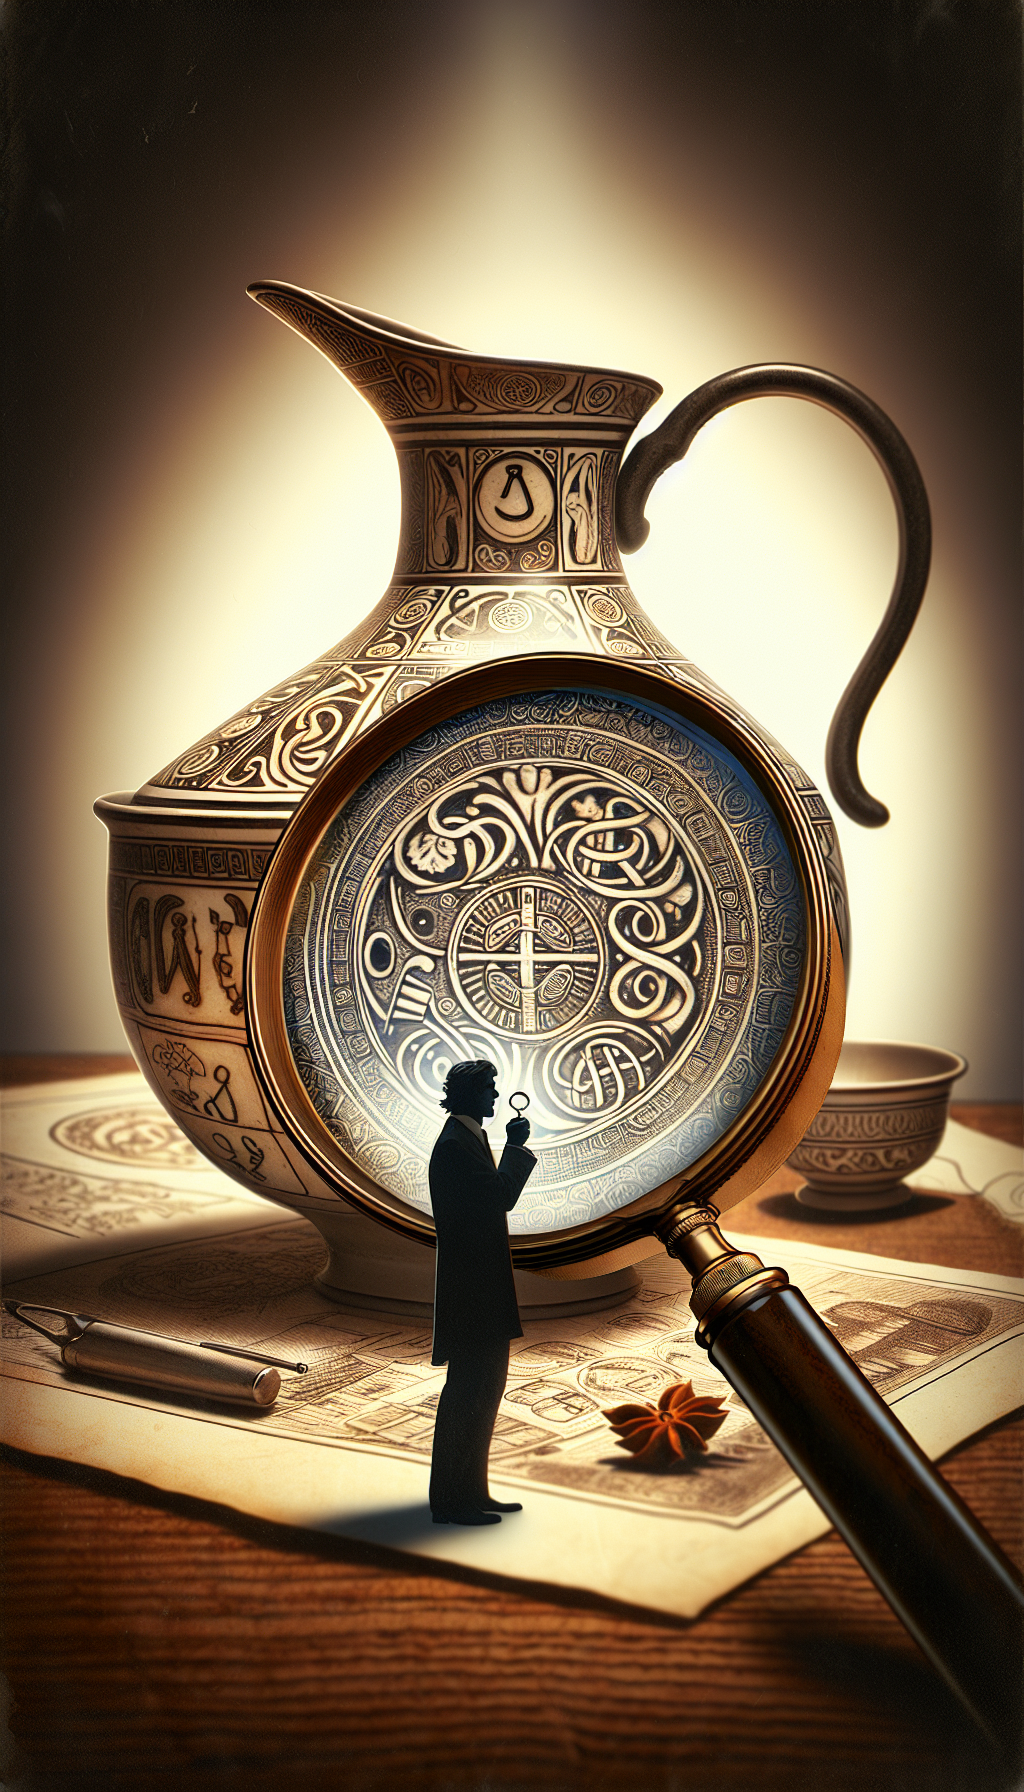 An intricate magnifying glass hovers over a vintage wash bowl and pitcher, zooming in on the maker's mark, revealing a mosaic of tiny symbols and dates woven together. A shadowy detective figure peers through the lens, a clue to the set's origins crystallizing amidst a swirl of artistic styles—an Art Nouveau flourish here, a Victorian etch there.